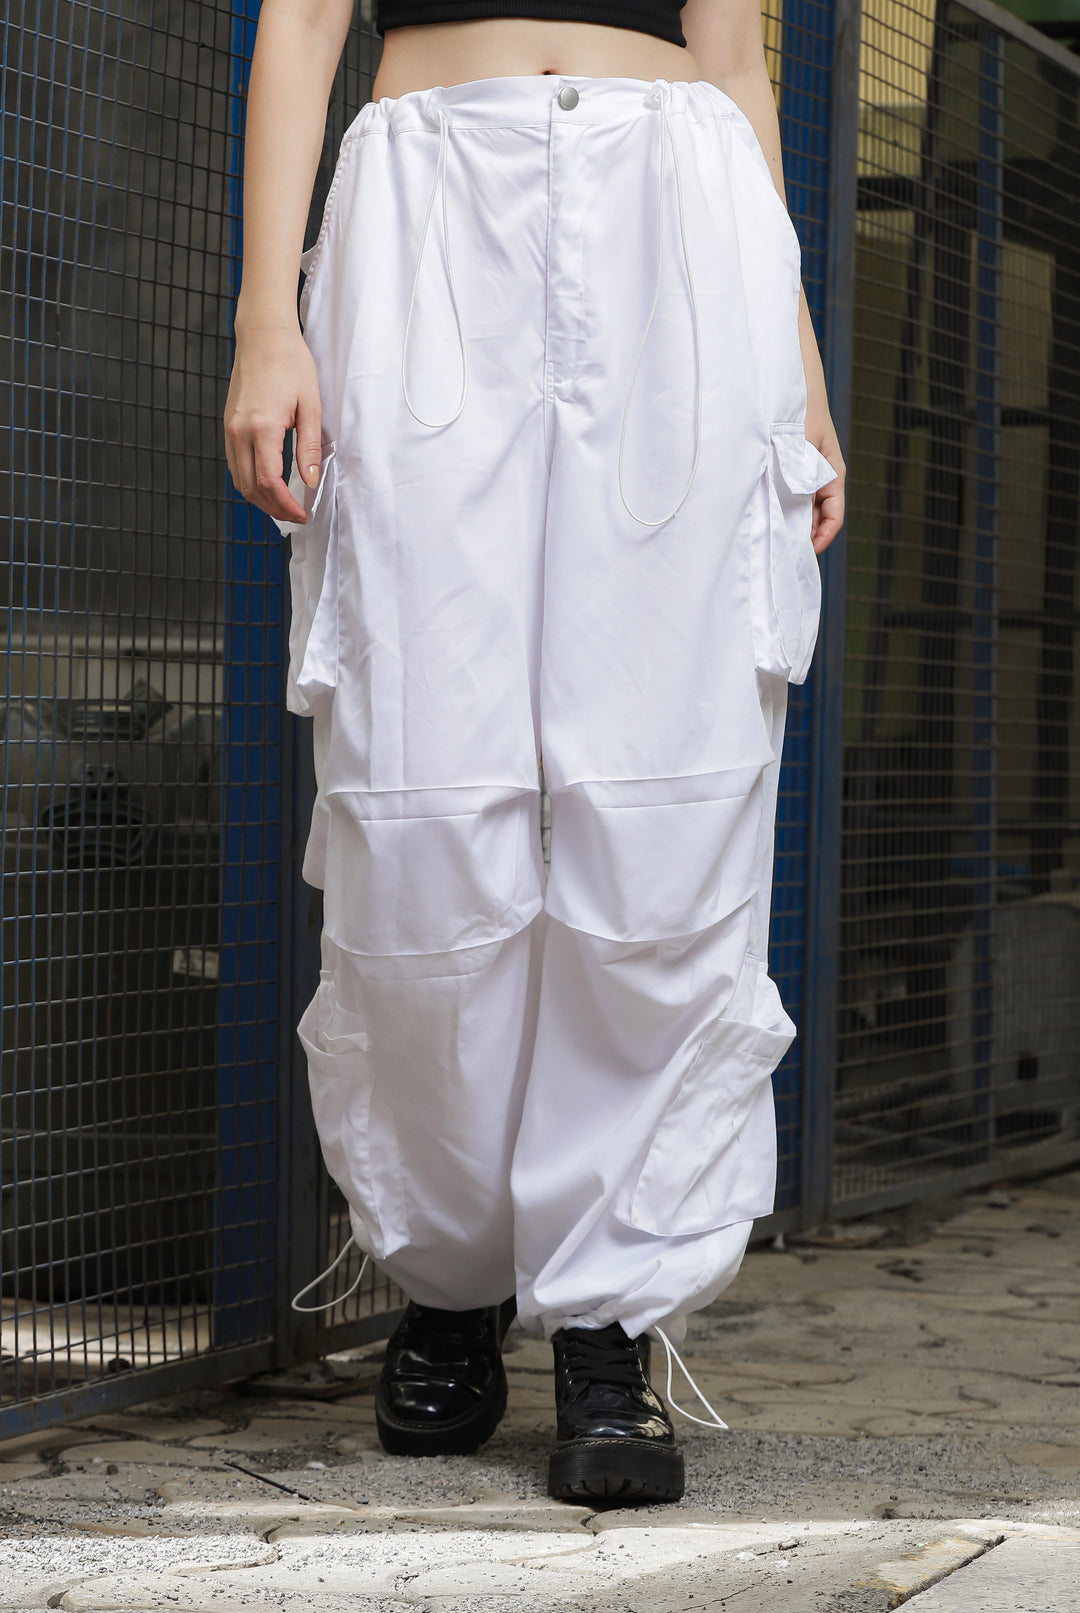 Limited Edition Women's White Parachute Cargo Pants with Pockets